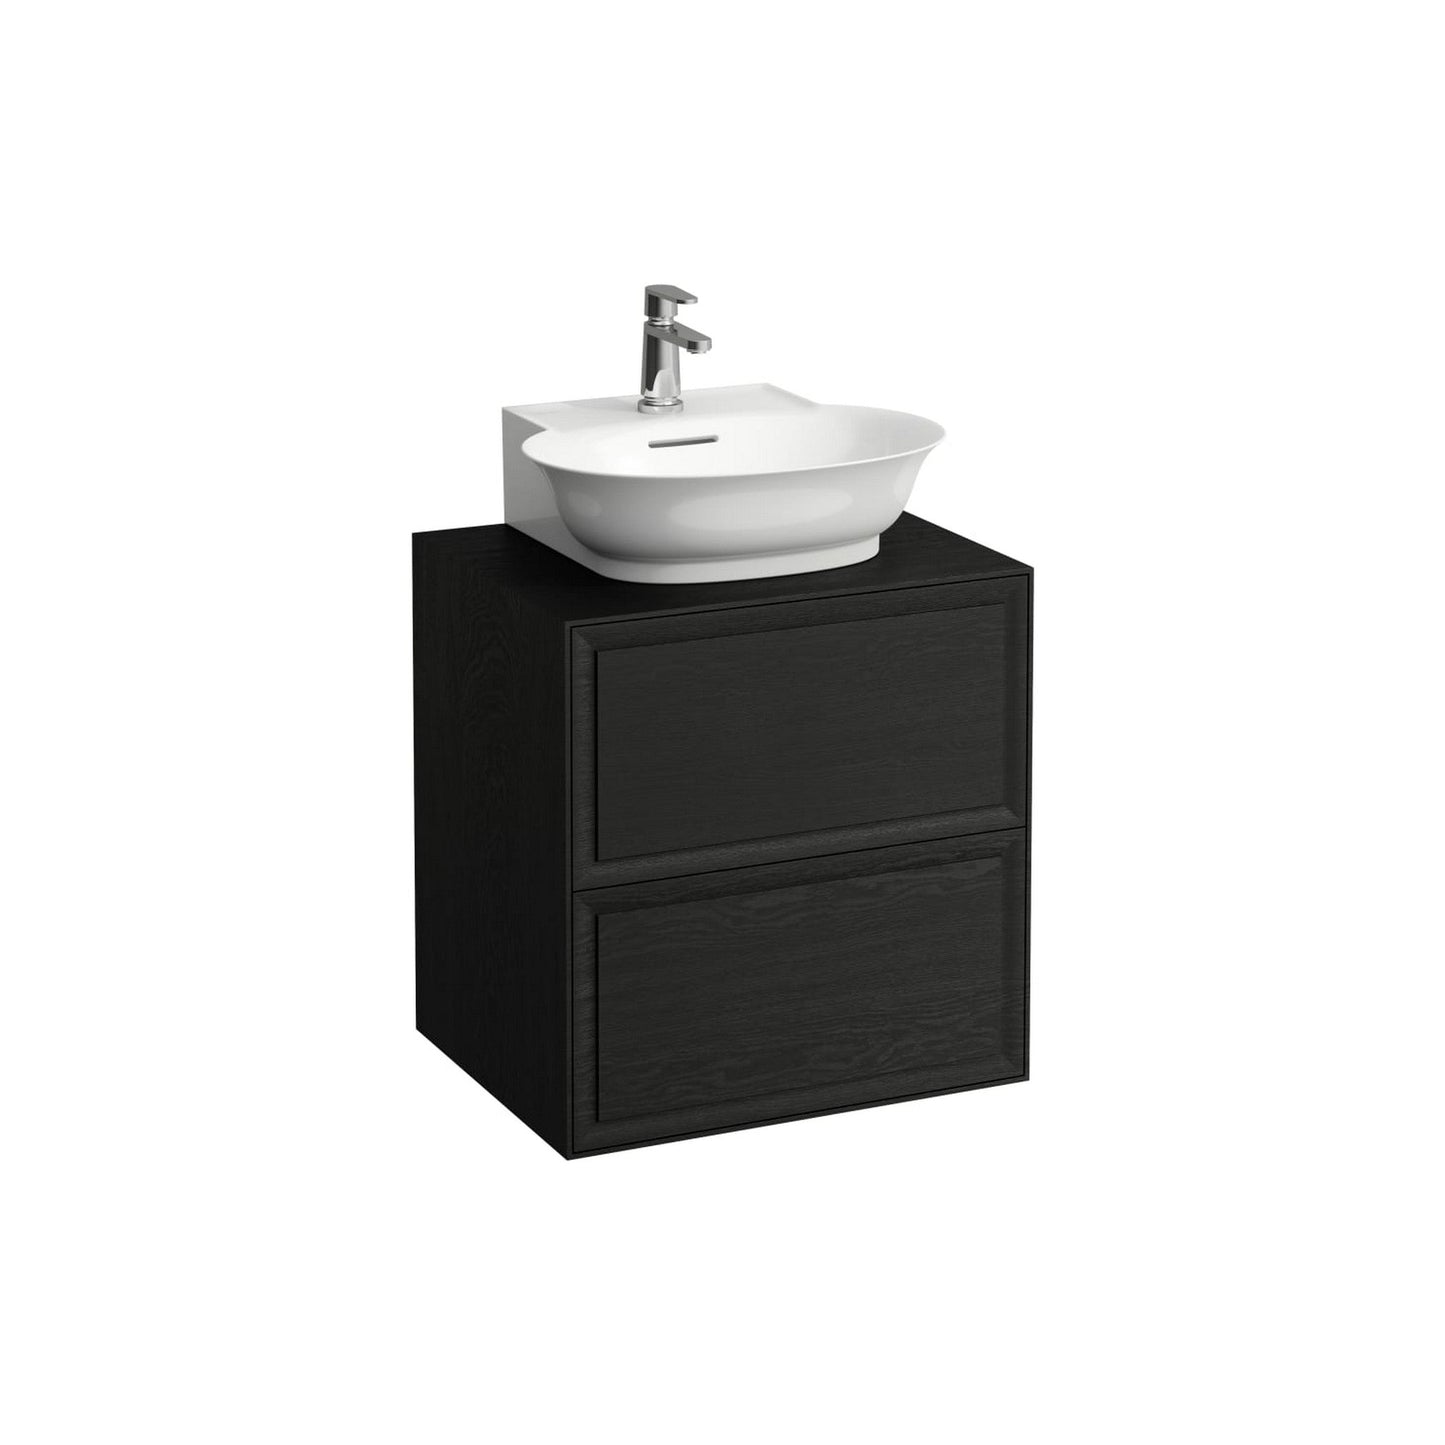 Laufen New Classic 23" 2-Drawer Blacked Oak Wall-Mounted Vanity for New Classic Bathroom Sink Model: H816852